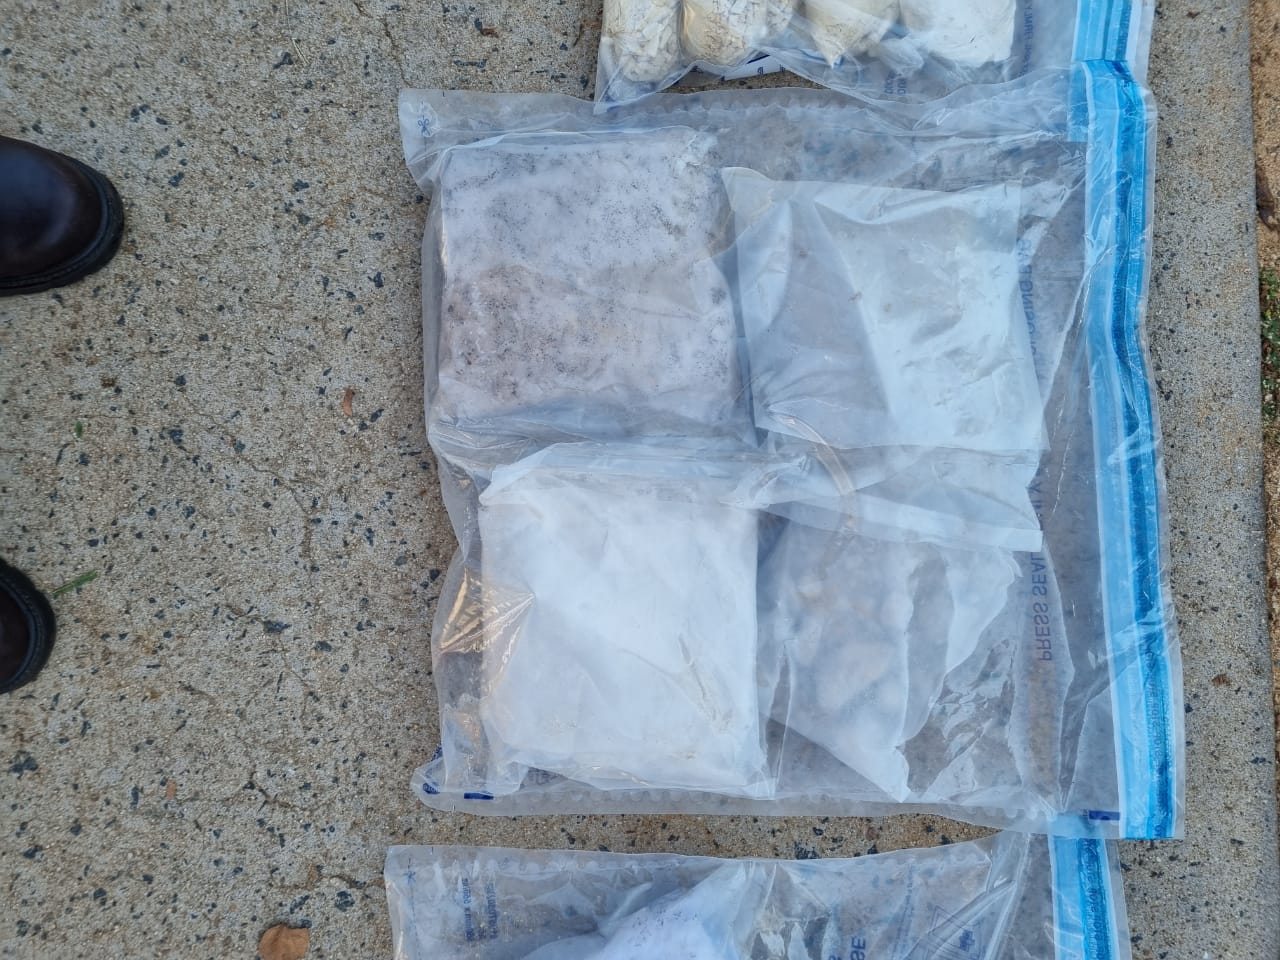 Man nabbed in possession of approximately R1.5 million worth of suspected drugs